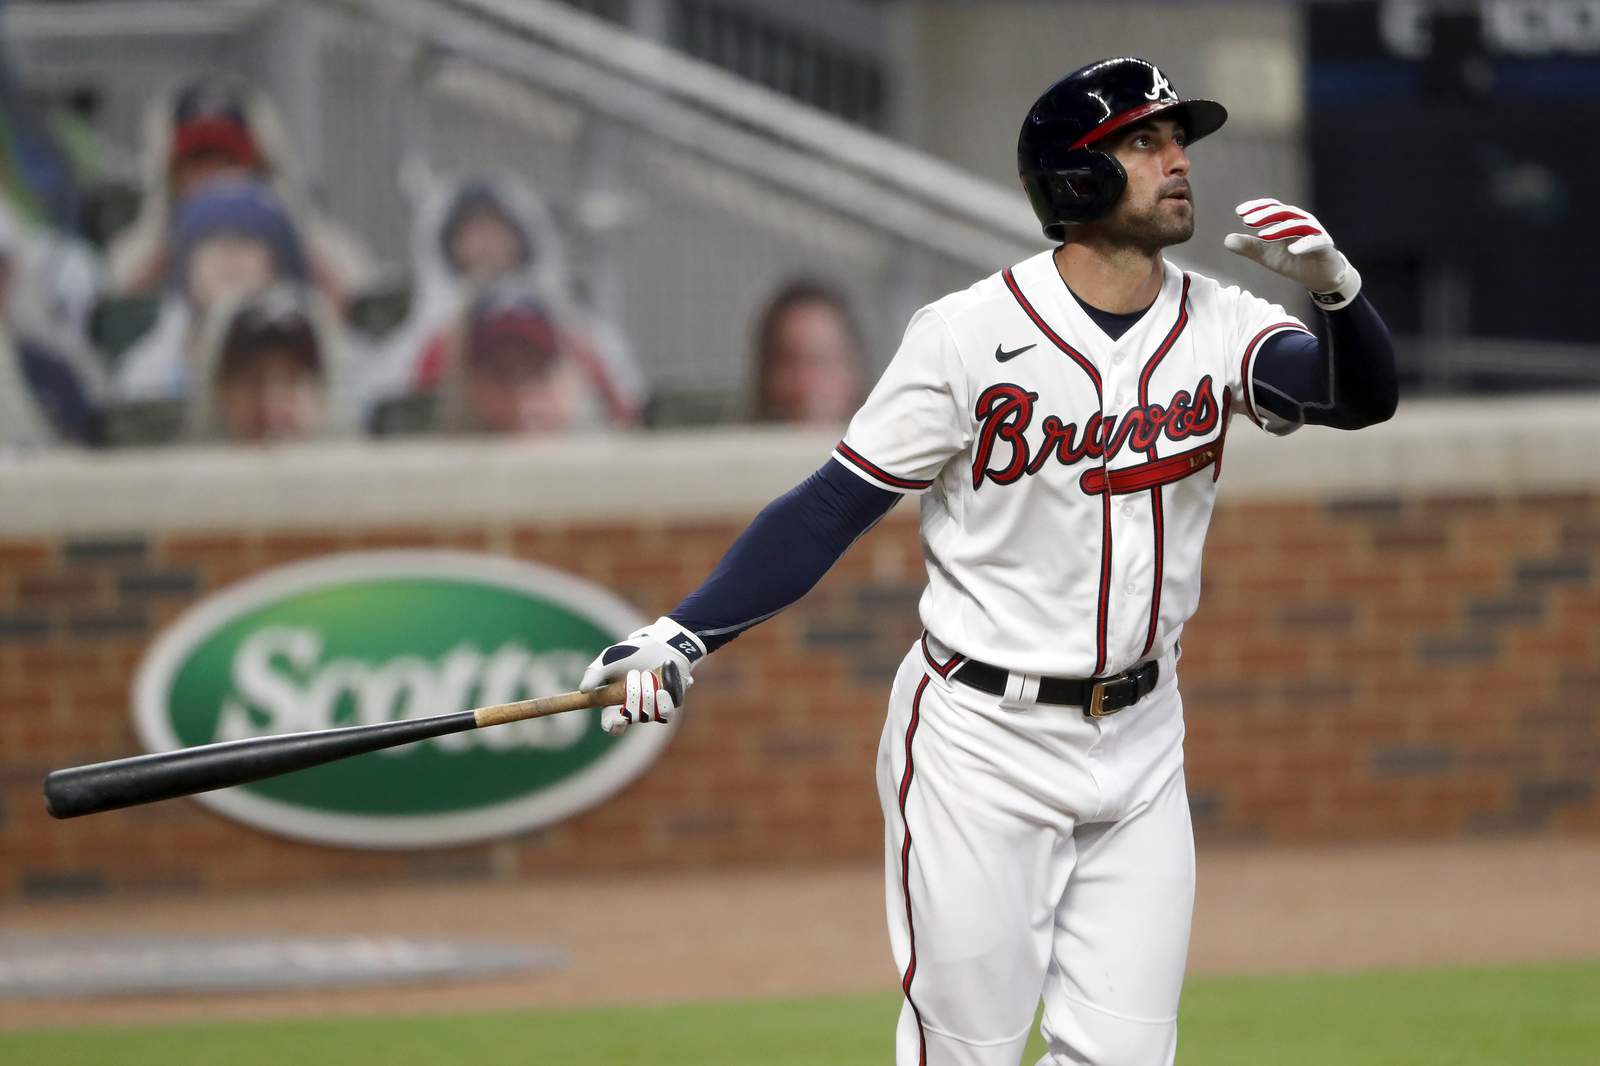 Braves OF Markakis goes on IL, possible COVID-19 exposure